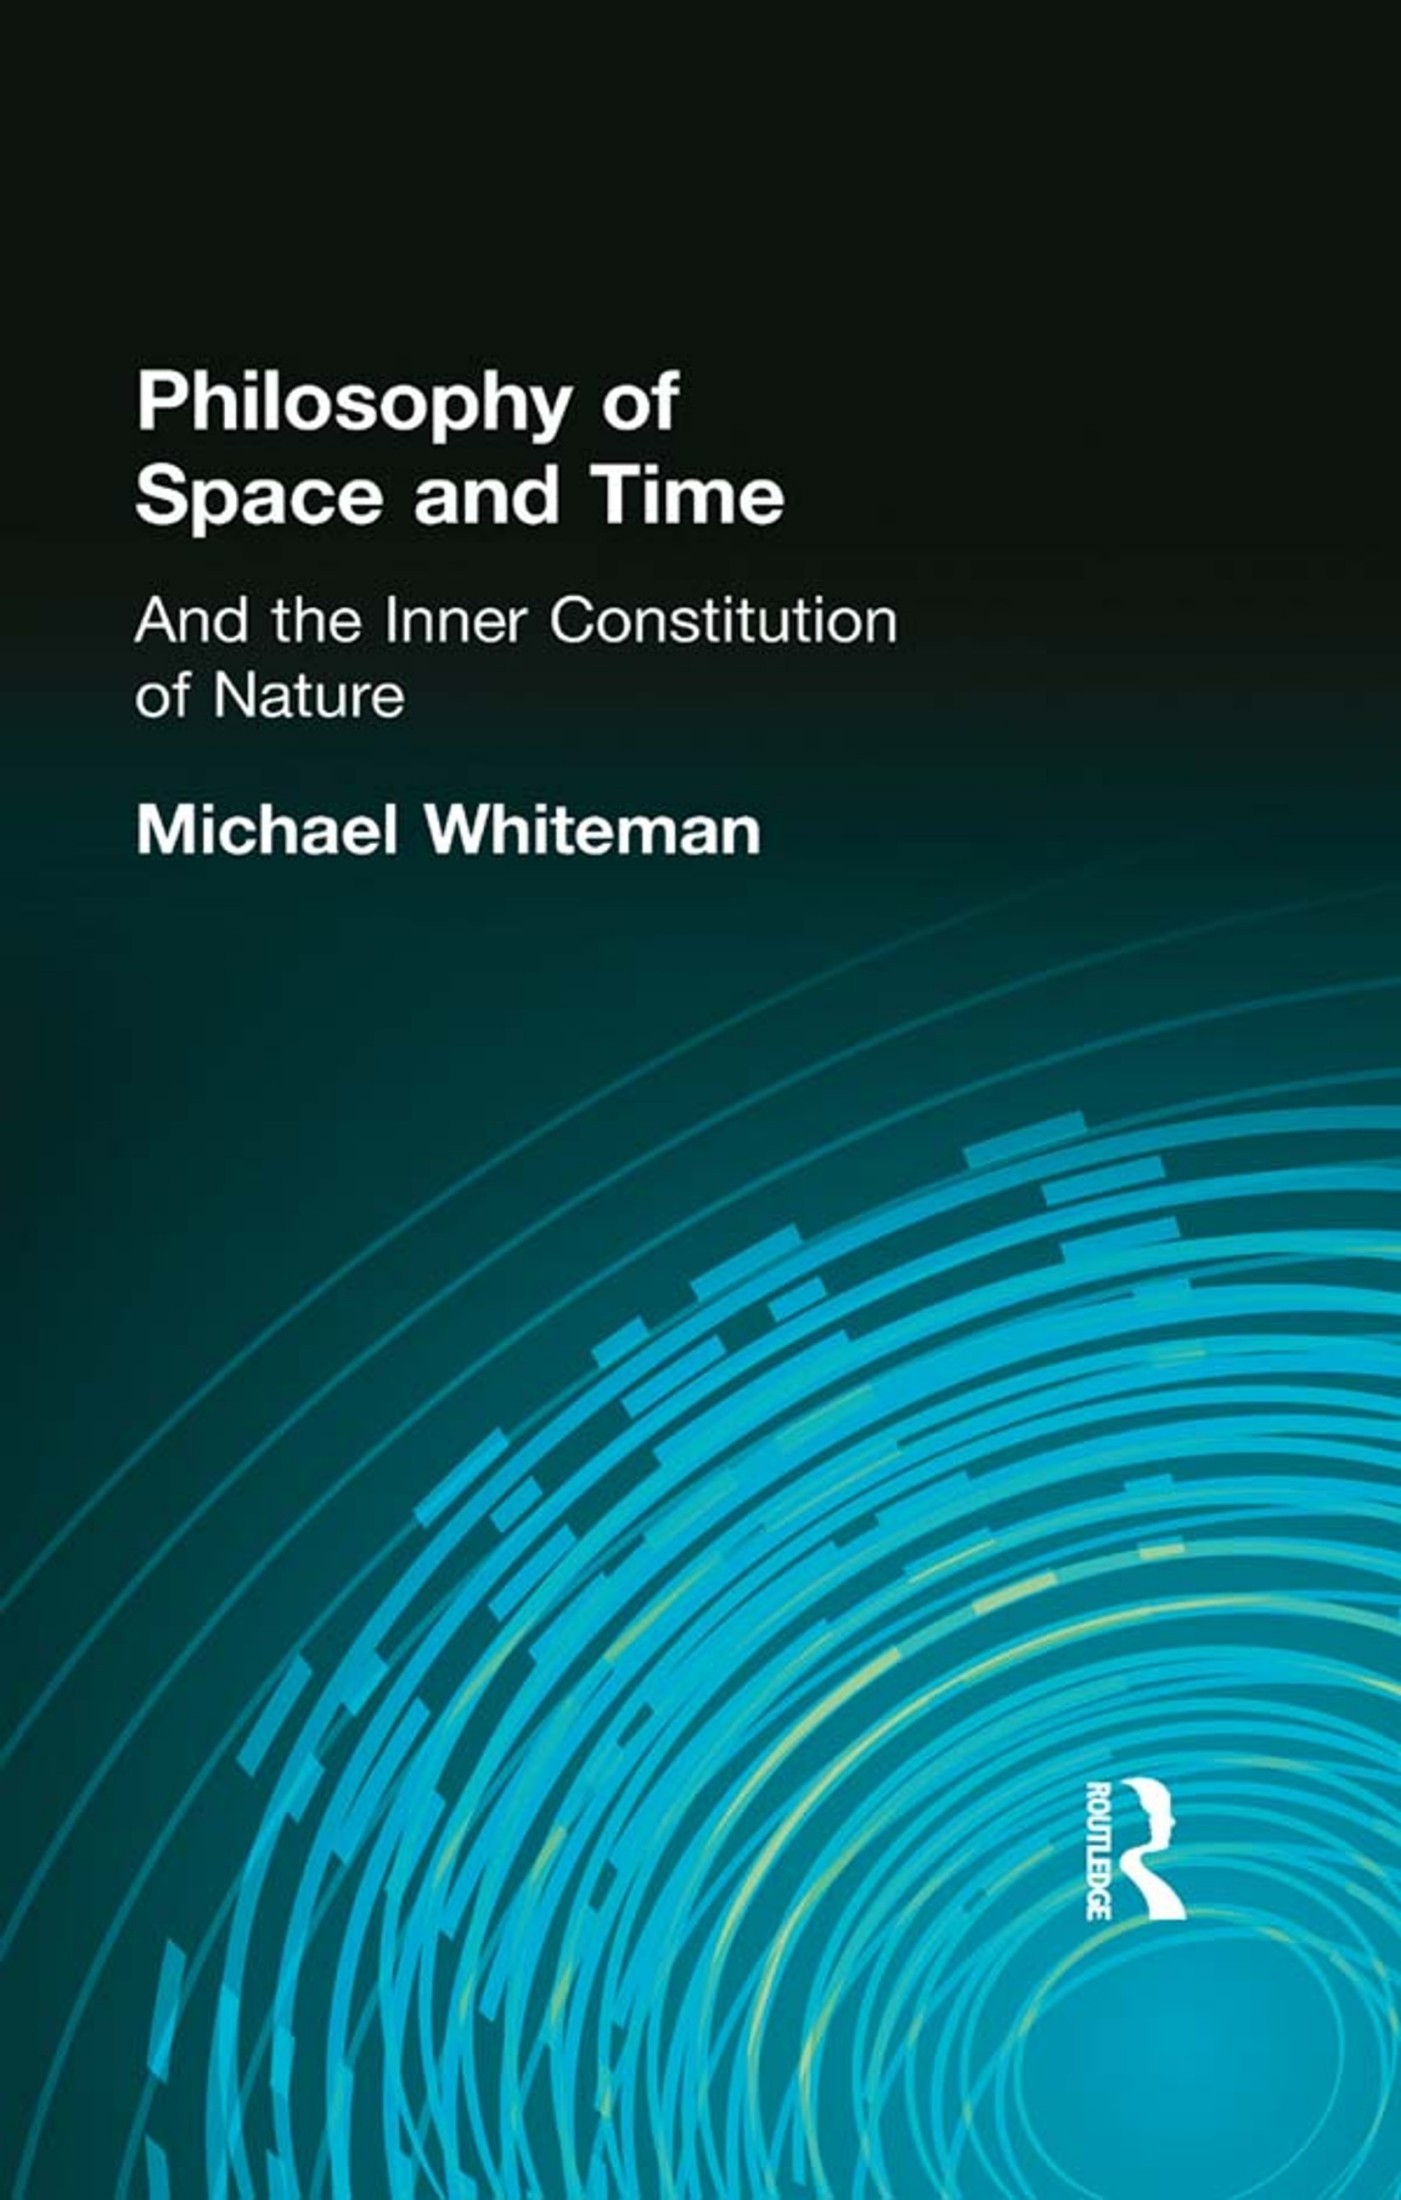 Philosophy of Space and Time: And the Inner Constitution of Nature